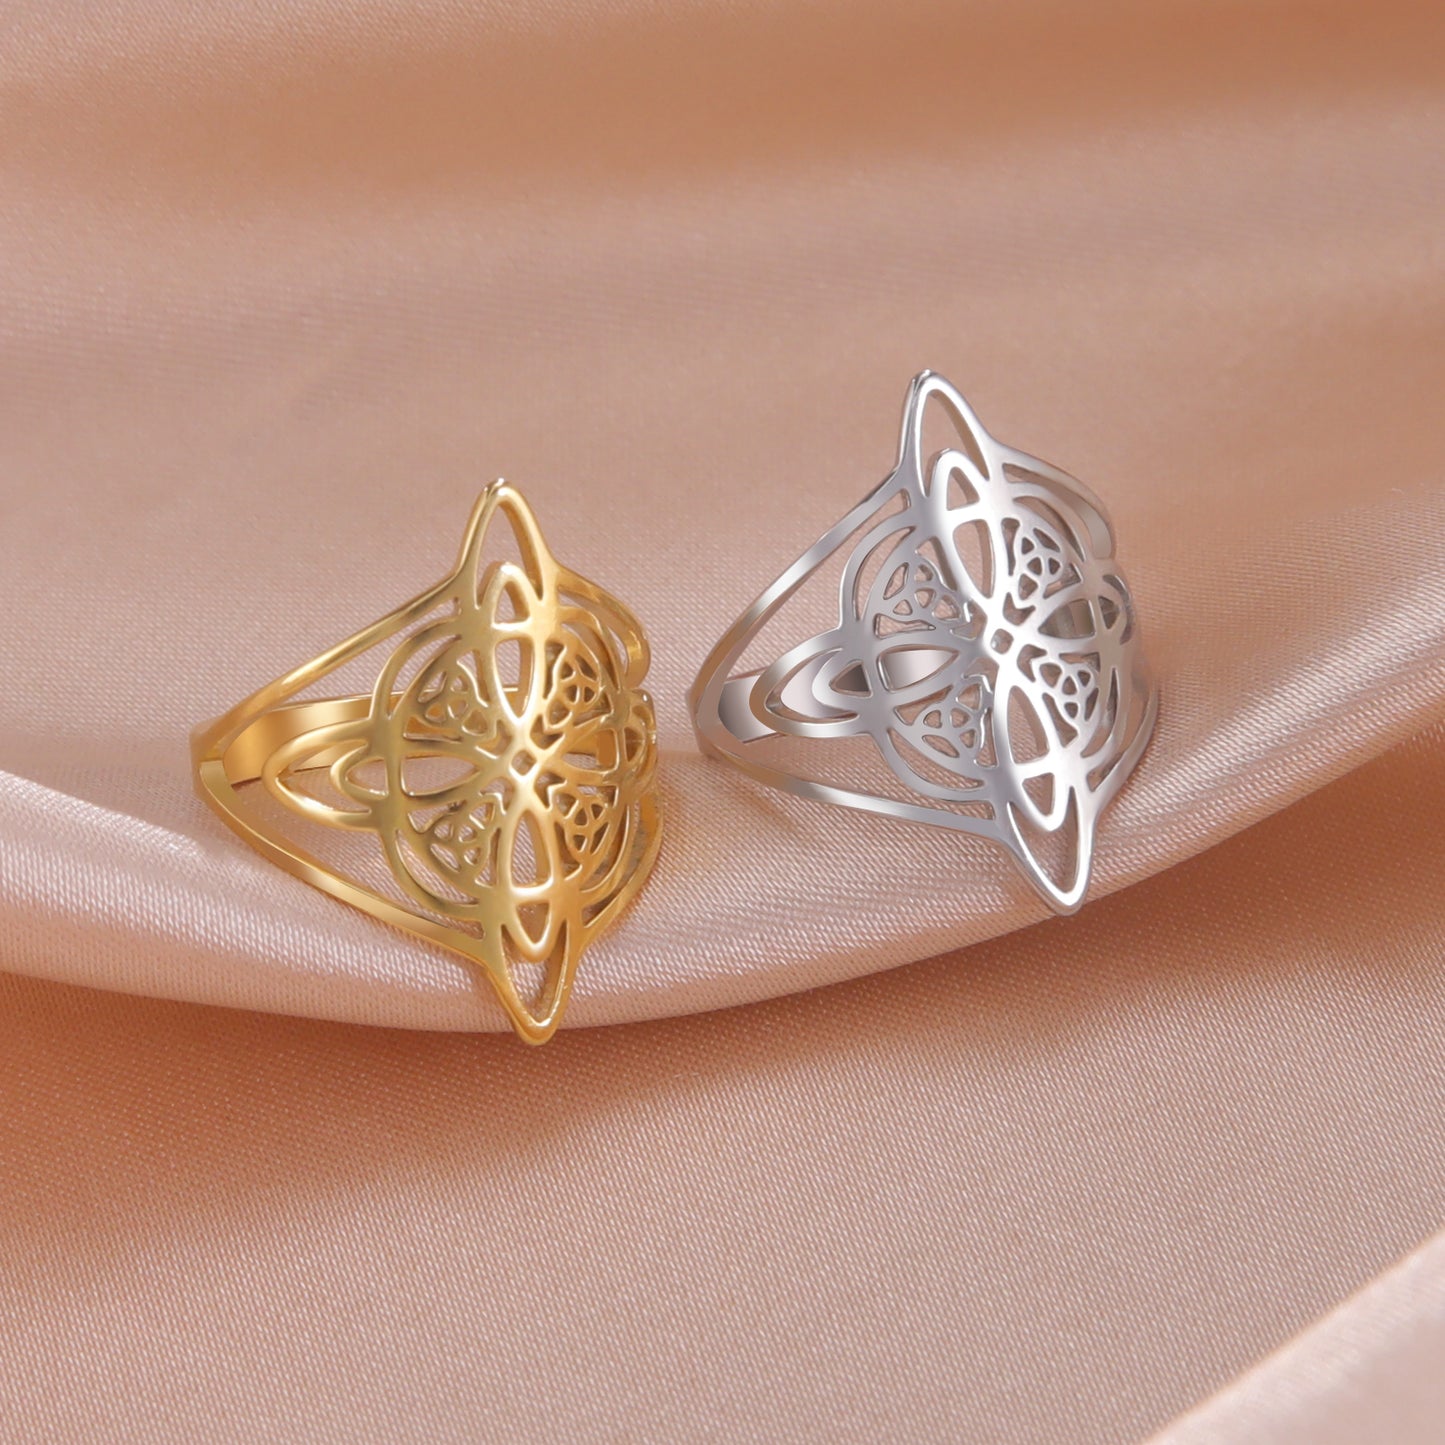 Witch's Knot Triquetra Ring | Wiccan Cross Protection Amulet | Celtics Knot Witchcraft Rings | Witchy Good Luck Charm Jewelry Gift For Spiritual Women | Apollo Tarot Jewelry Shop